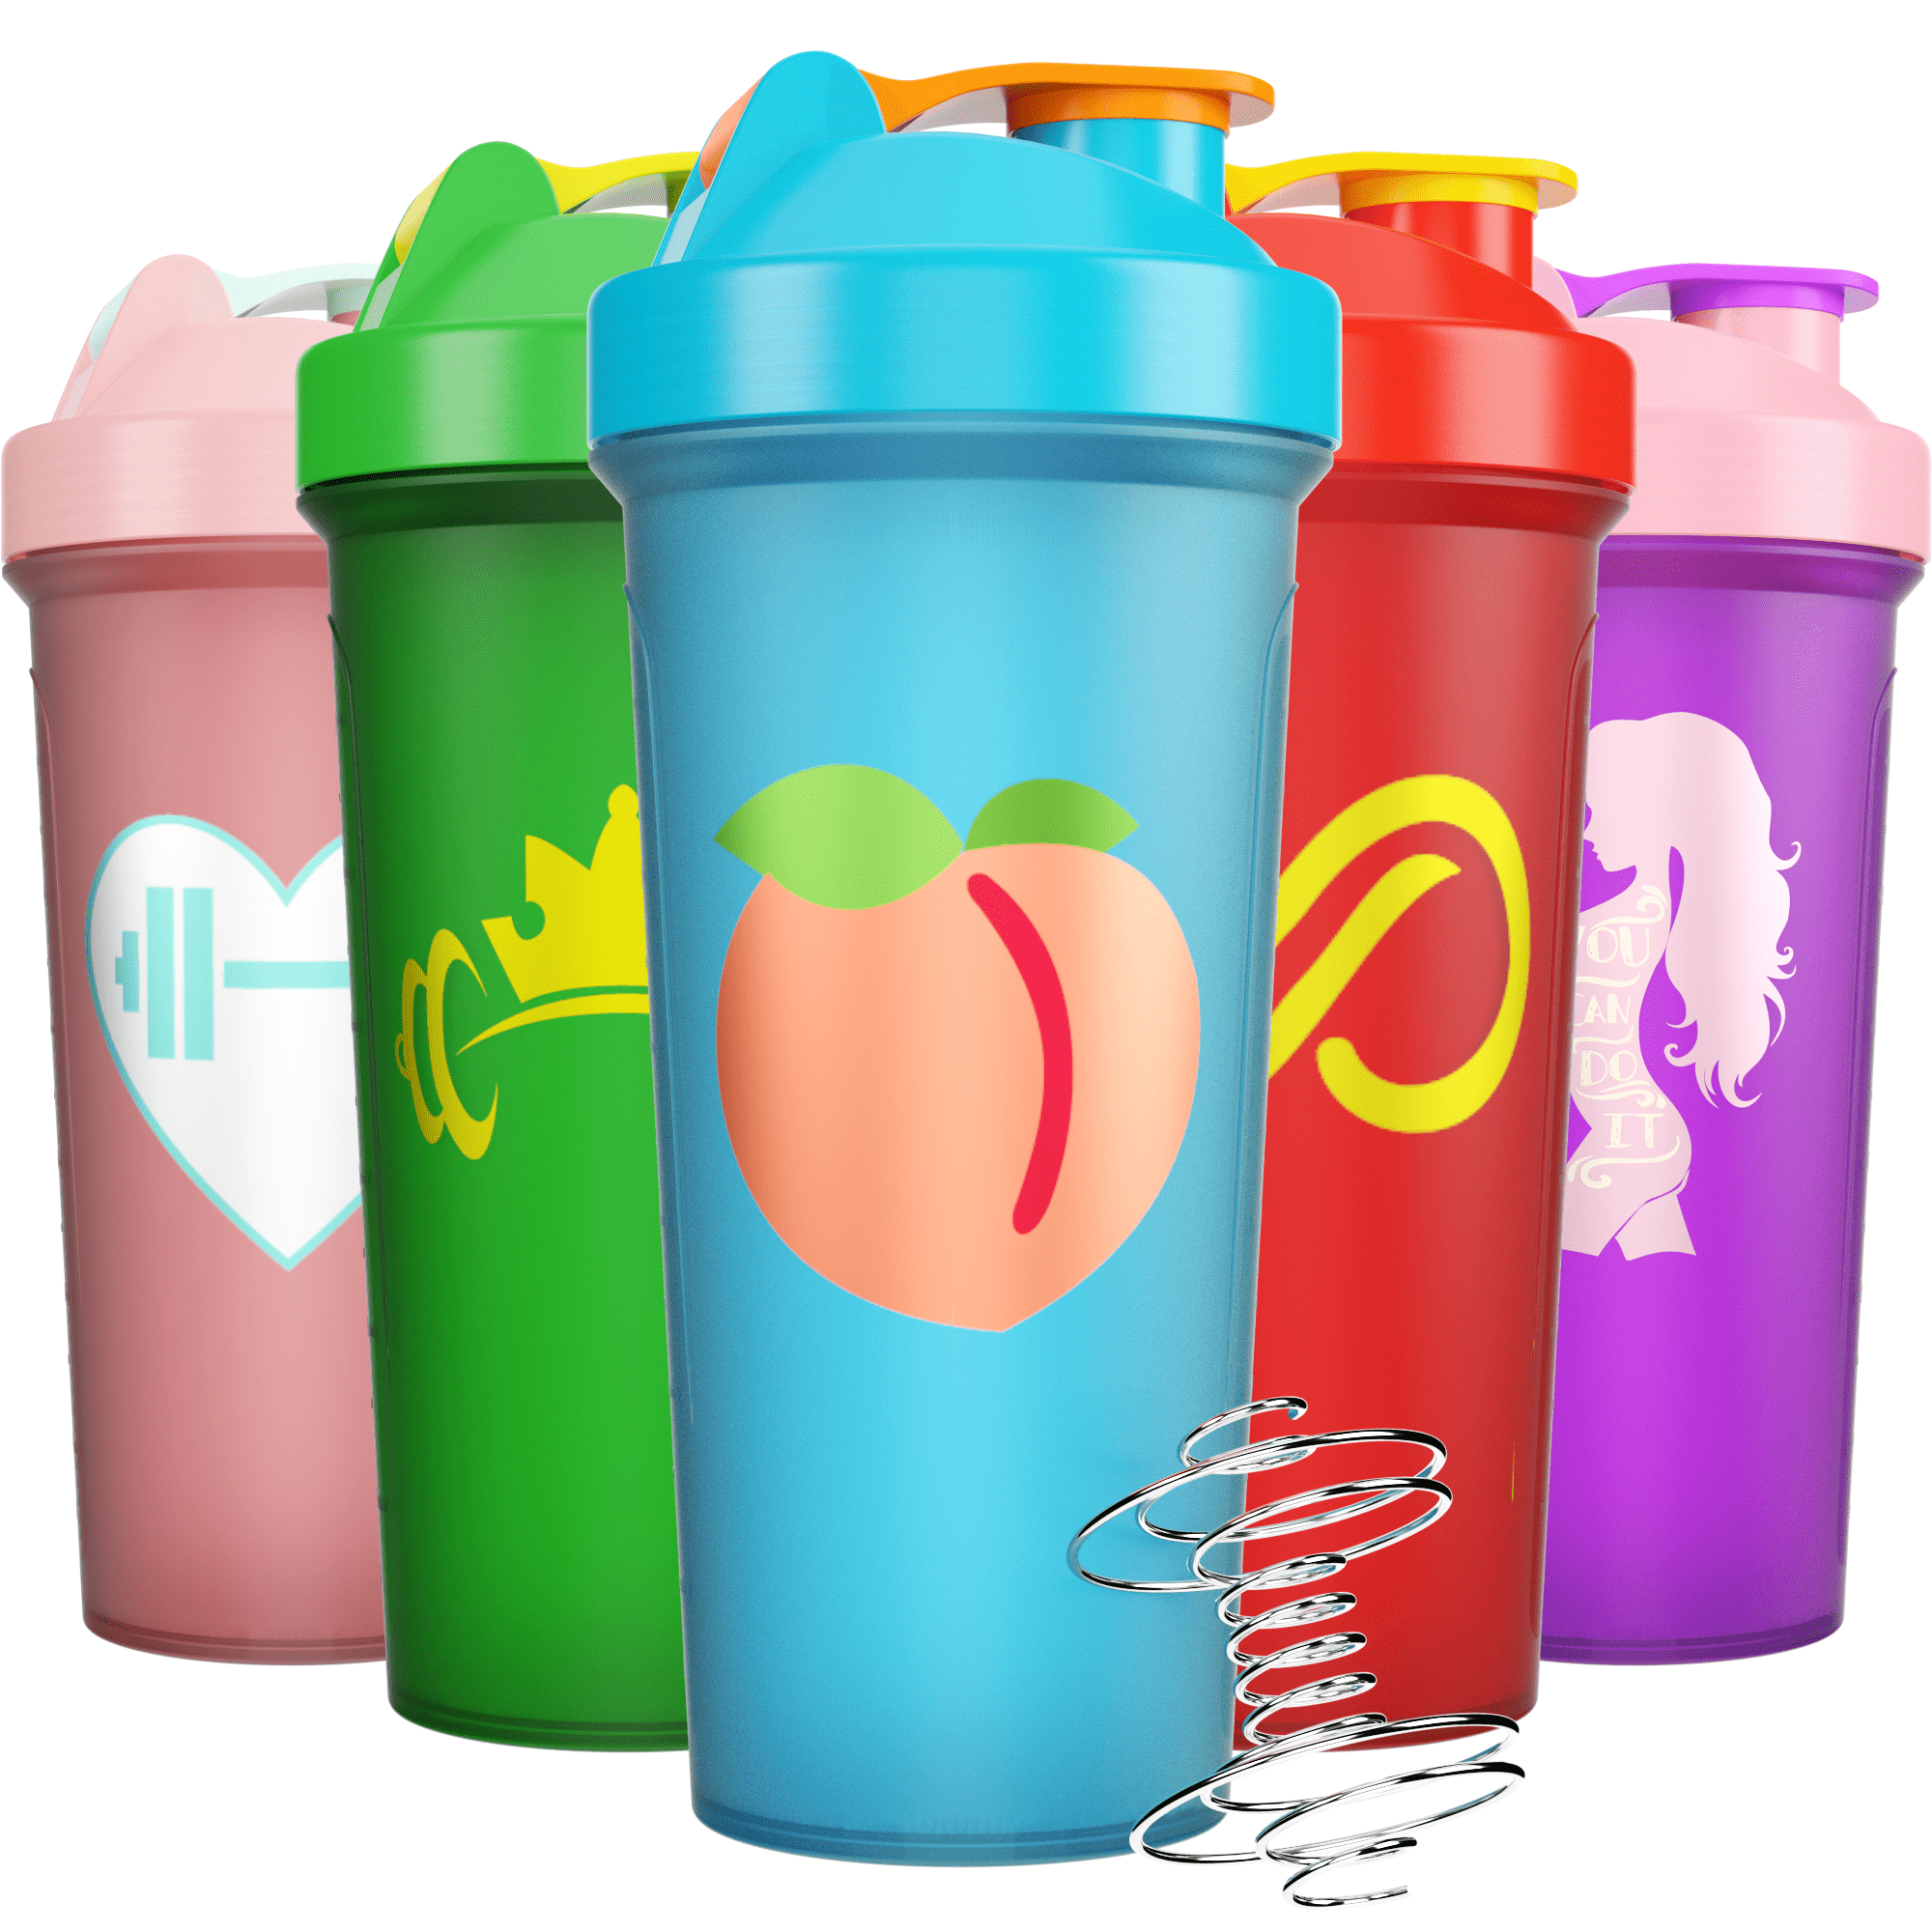 JEELA Sports 5 Pack Protein Shaker Bottles for Protein Mixes -20 oz- Dishwasher Safe Shaker Cups for Protein Shakes - Shaker Cup for Blender Protein